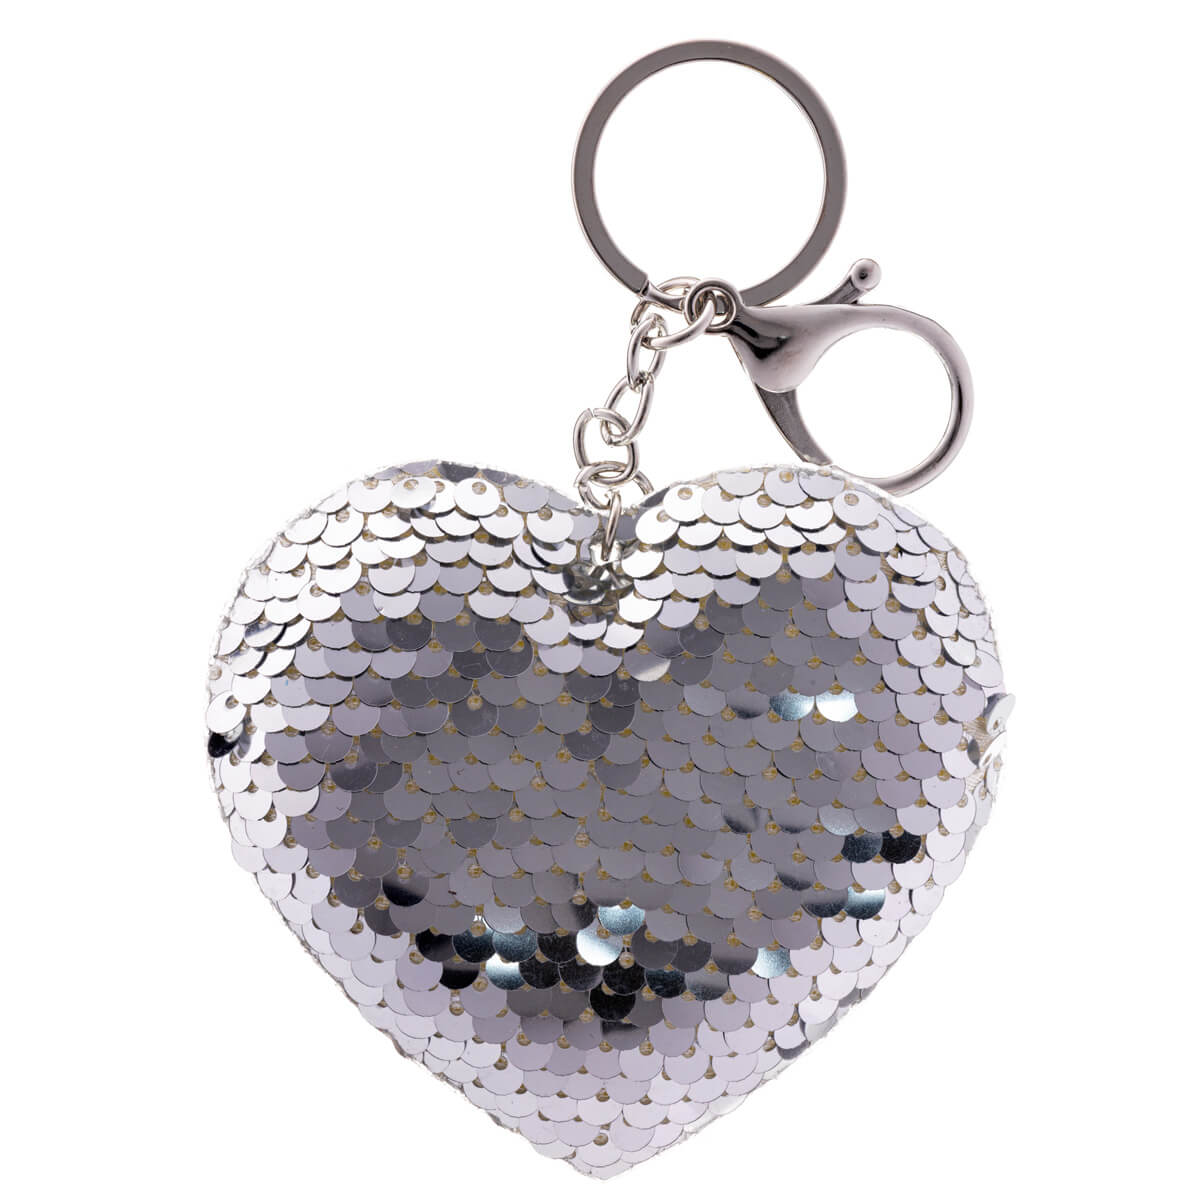 A sequin with heart keychain